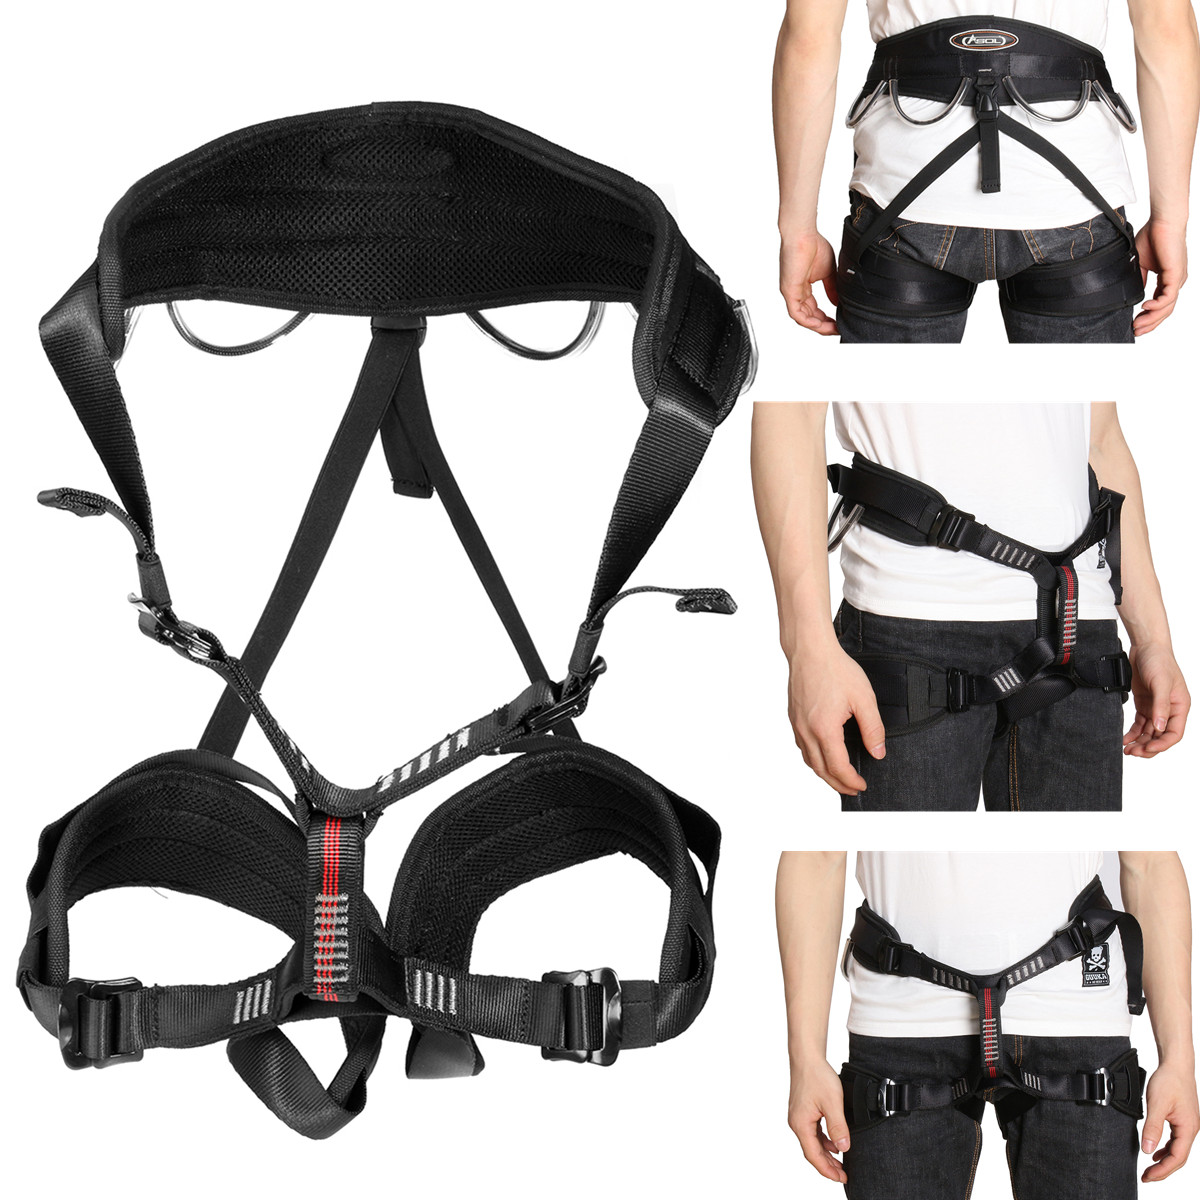 

IPRee™ Outdoor Mountain Rock Climbing Safety Belt Harness Seat Strap Rappelling Equipment